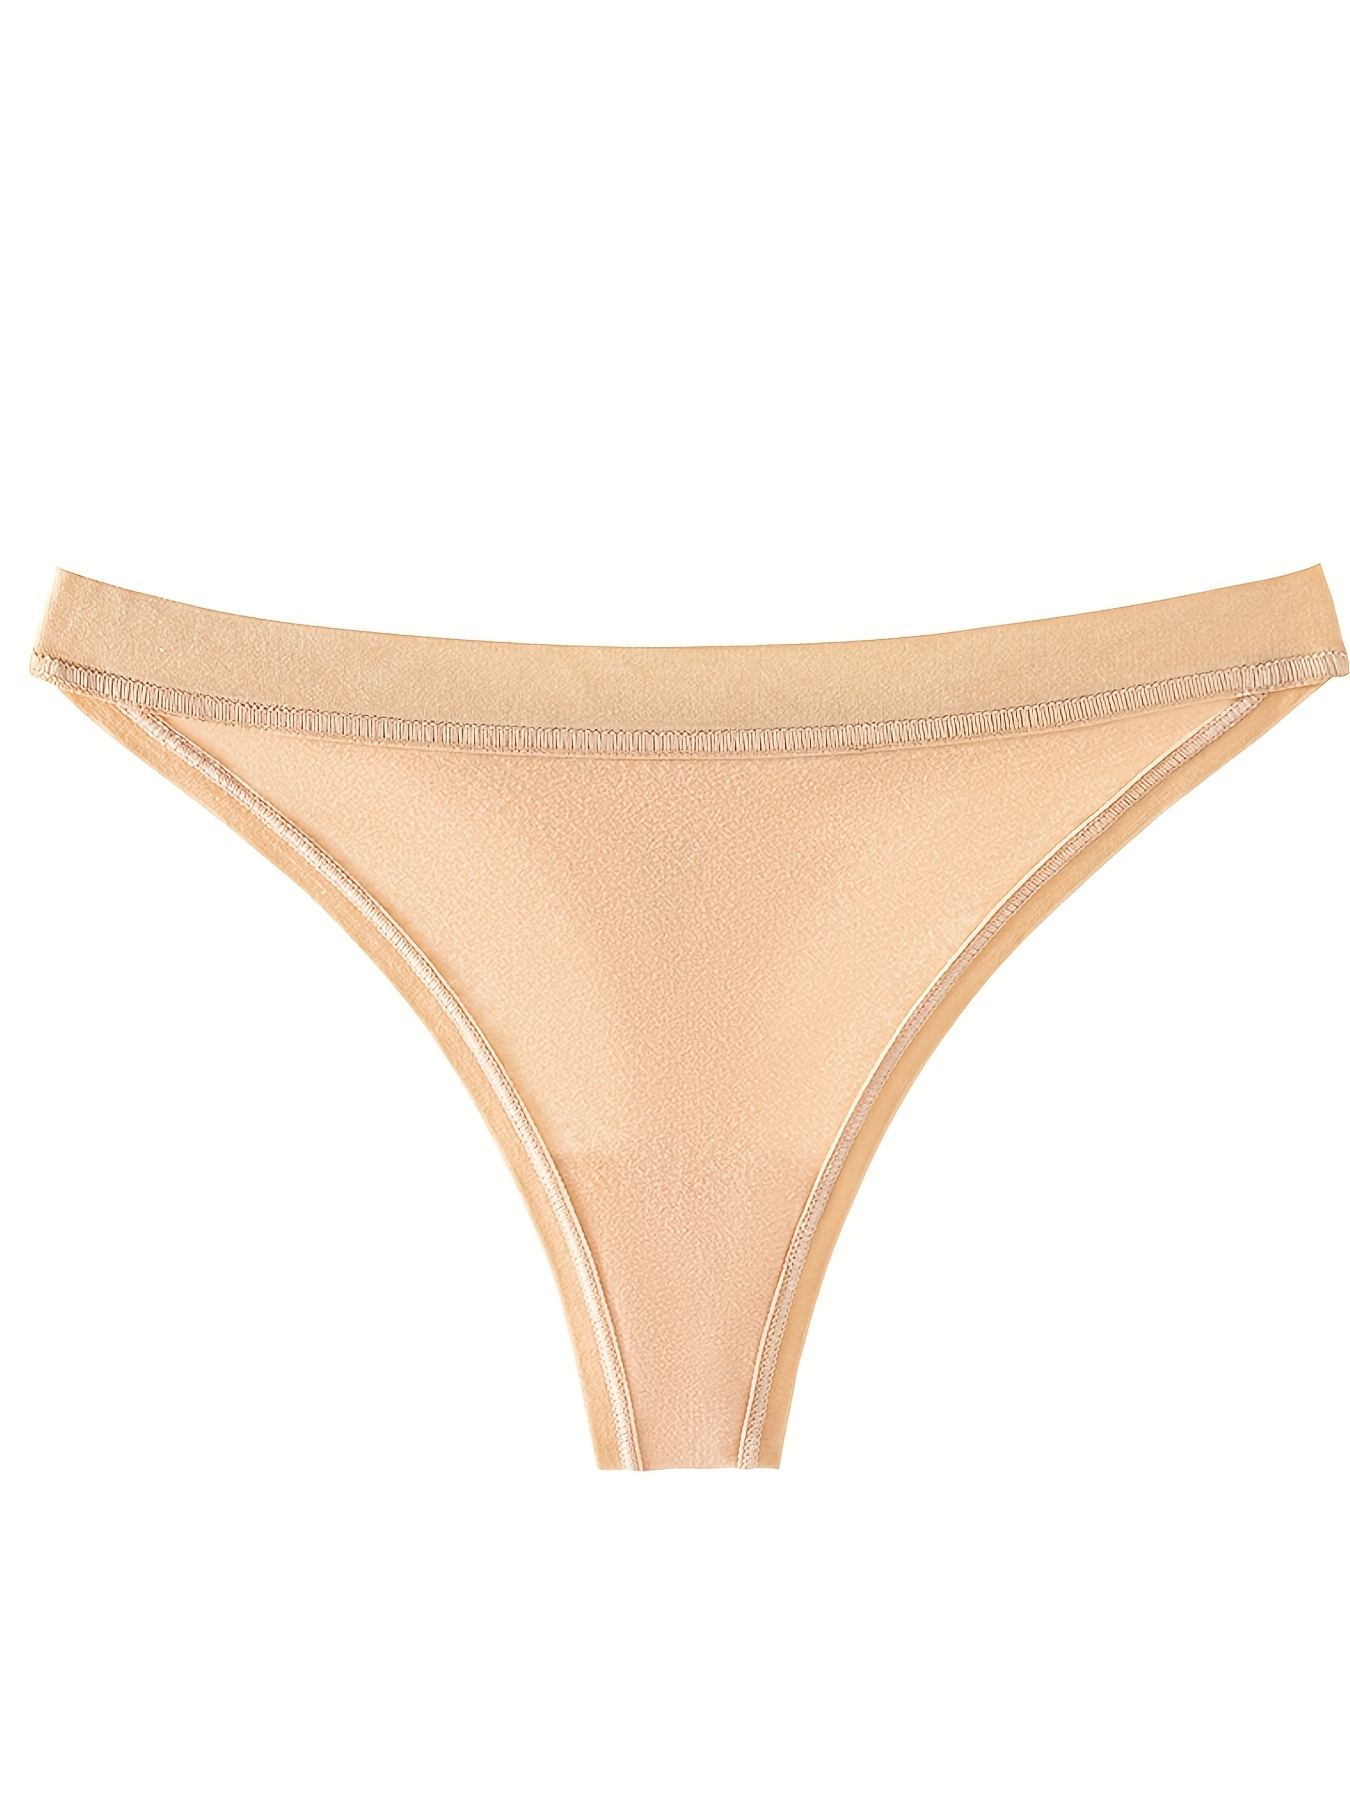 Imitation Traceless Solid Color Sexy Bikini Thong Sports Underwear Plus  Size Cotton Barely There Panties for (Beige, M) at  Women's Clothing  store